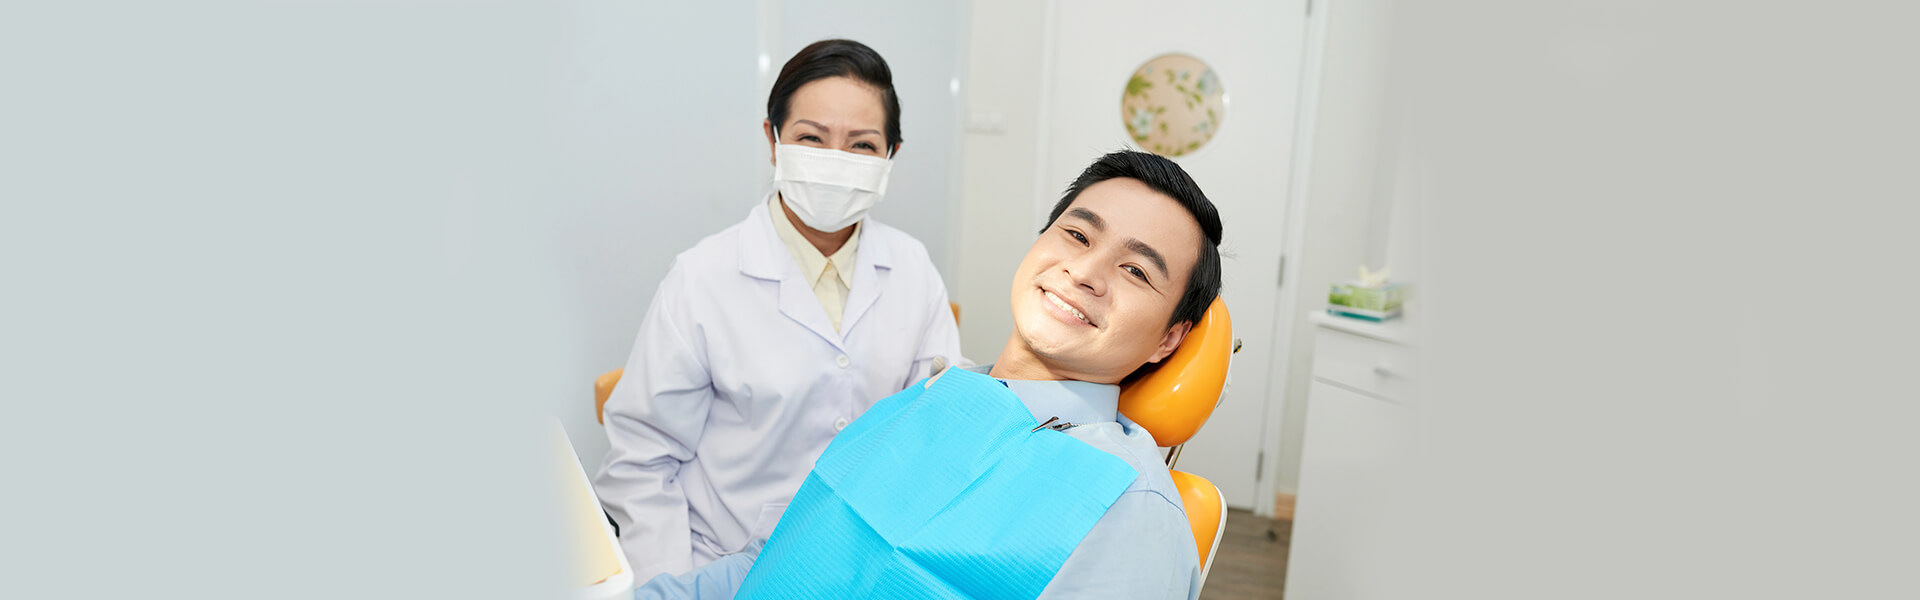 Step by Step Procedure of Getting a Full Dental Examination